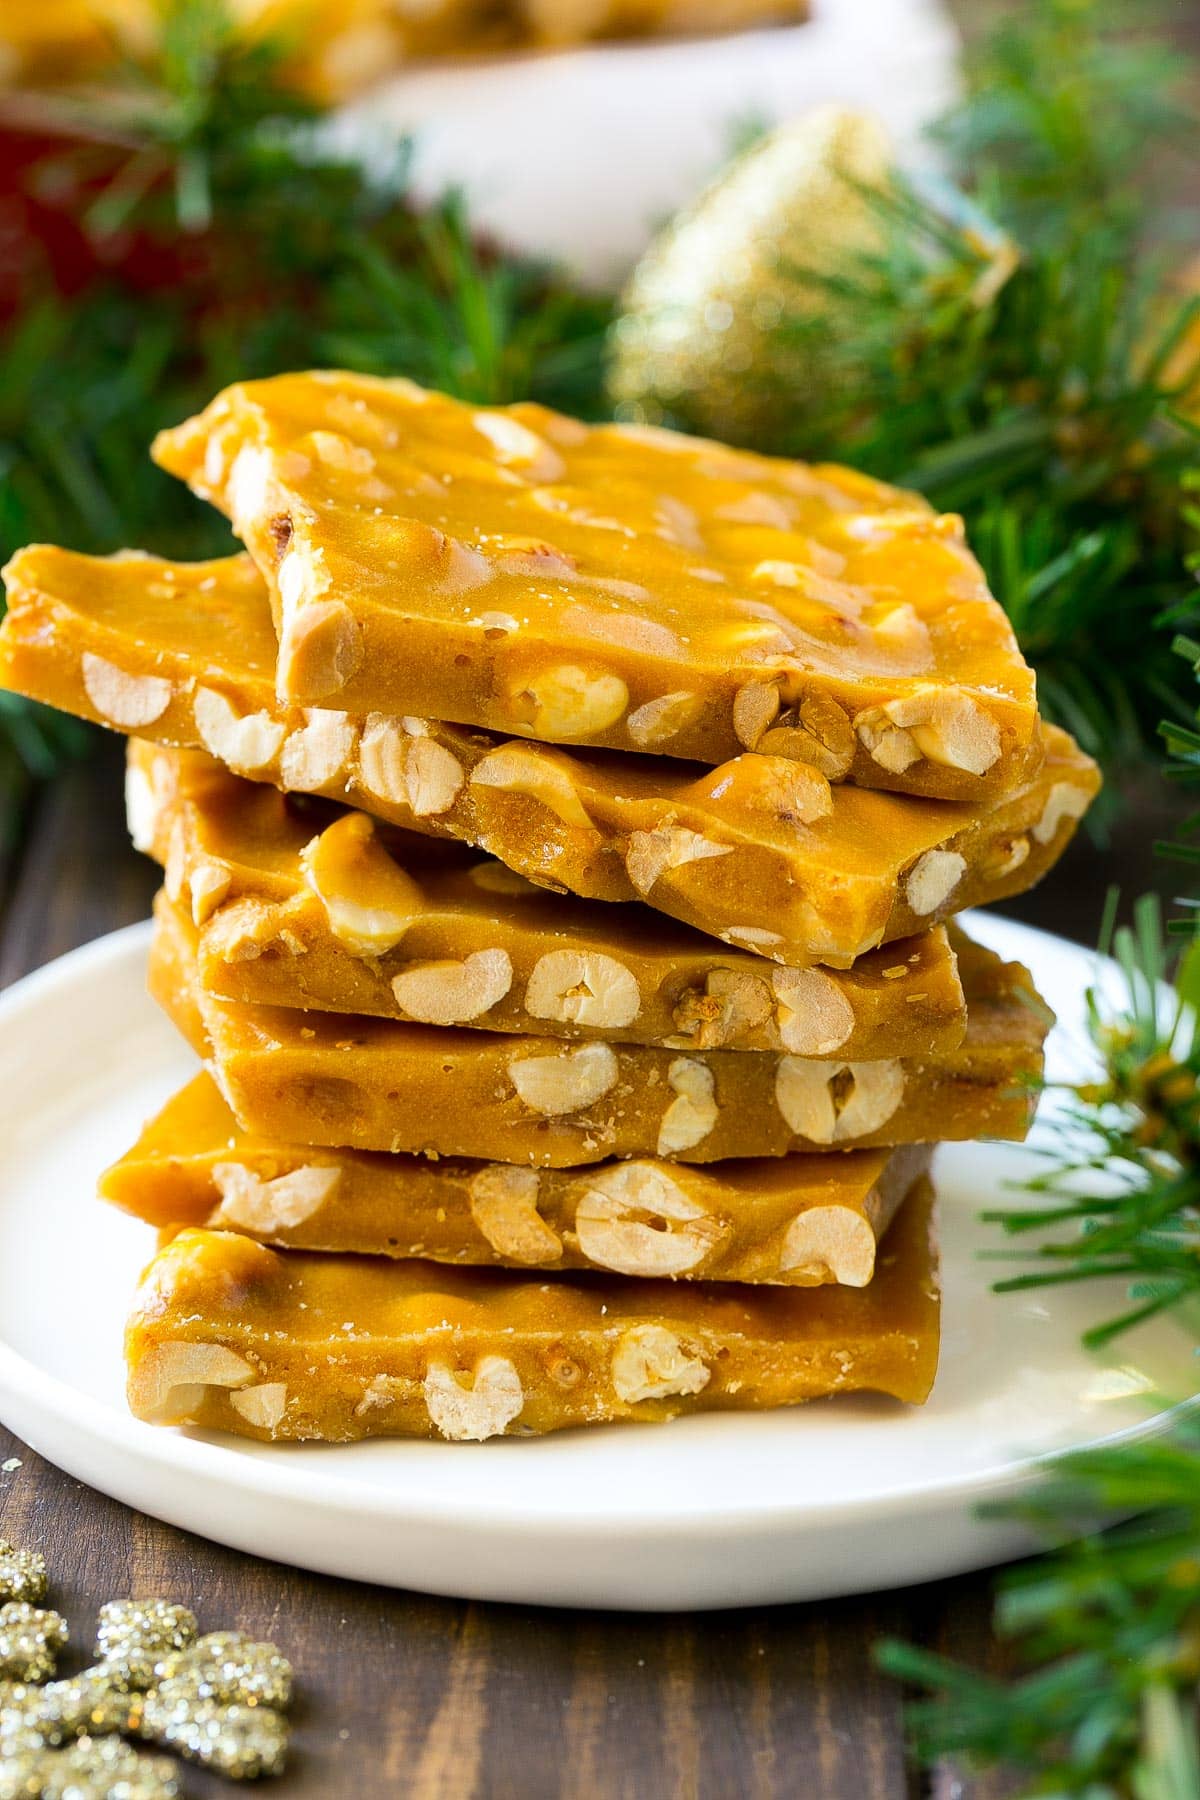 Peanut brittle stacked onto a serving plate.